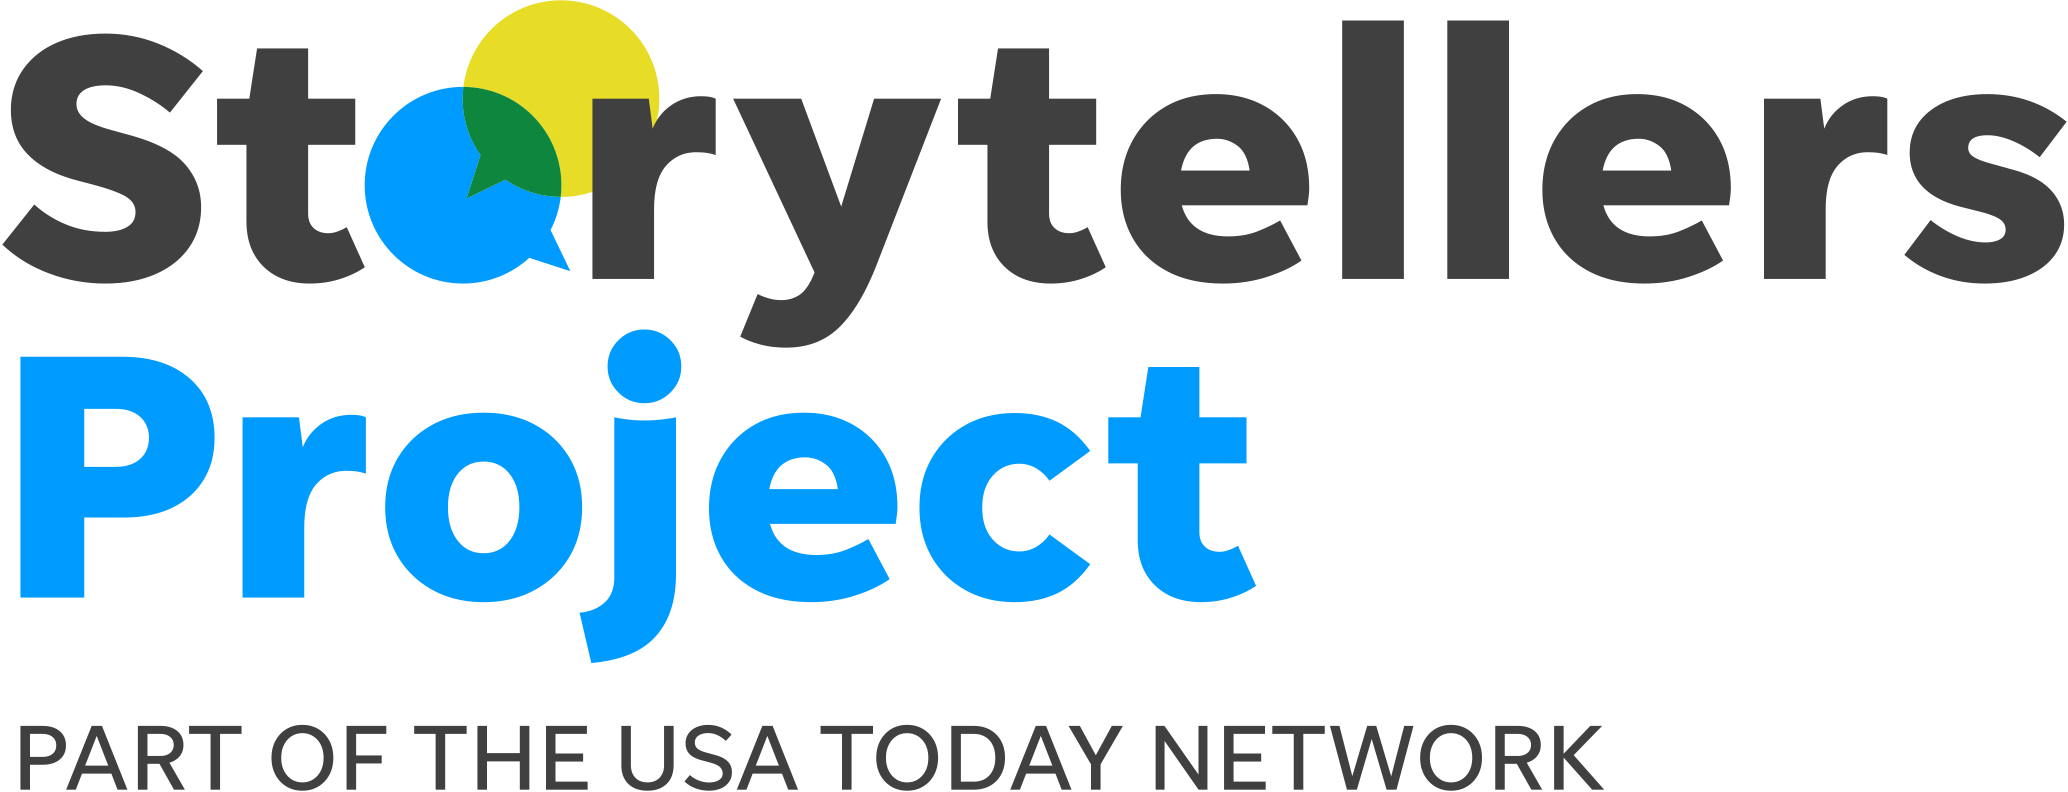 The Storytellers Project | part of the USA TODAY NETWORK